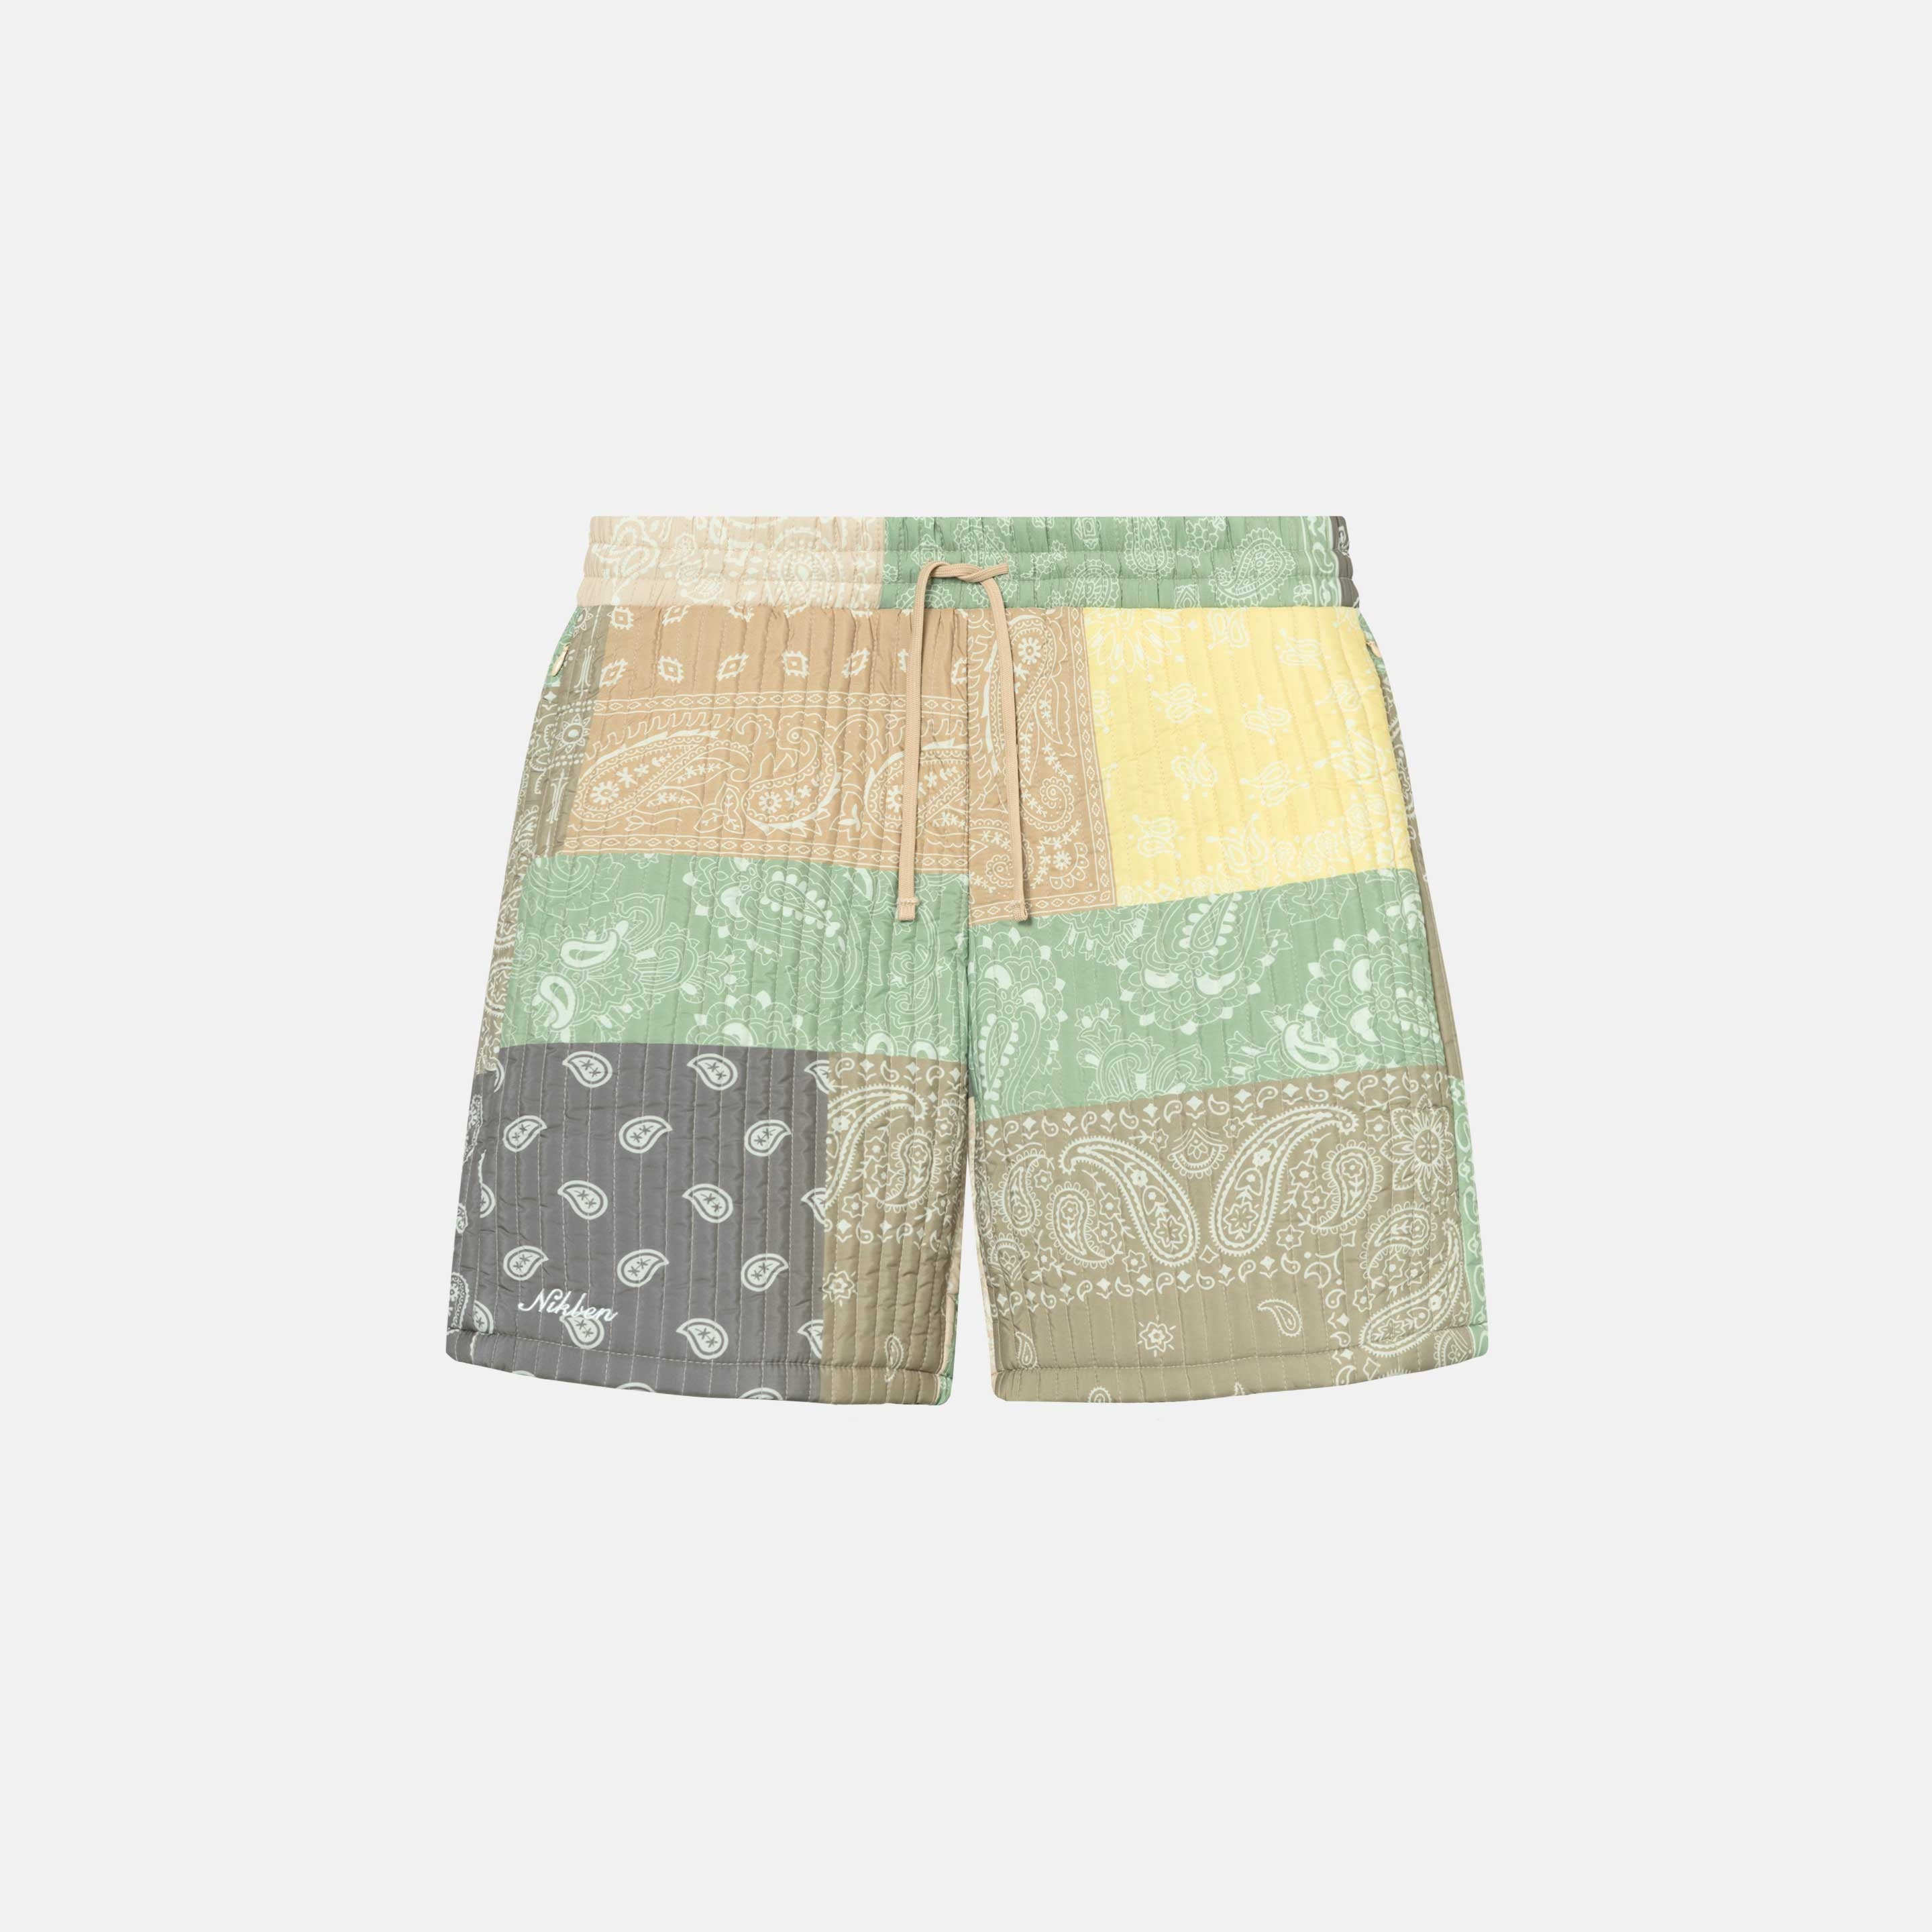 Quilted shorts with elastic drawstrings and multi colored paisley pattern